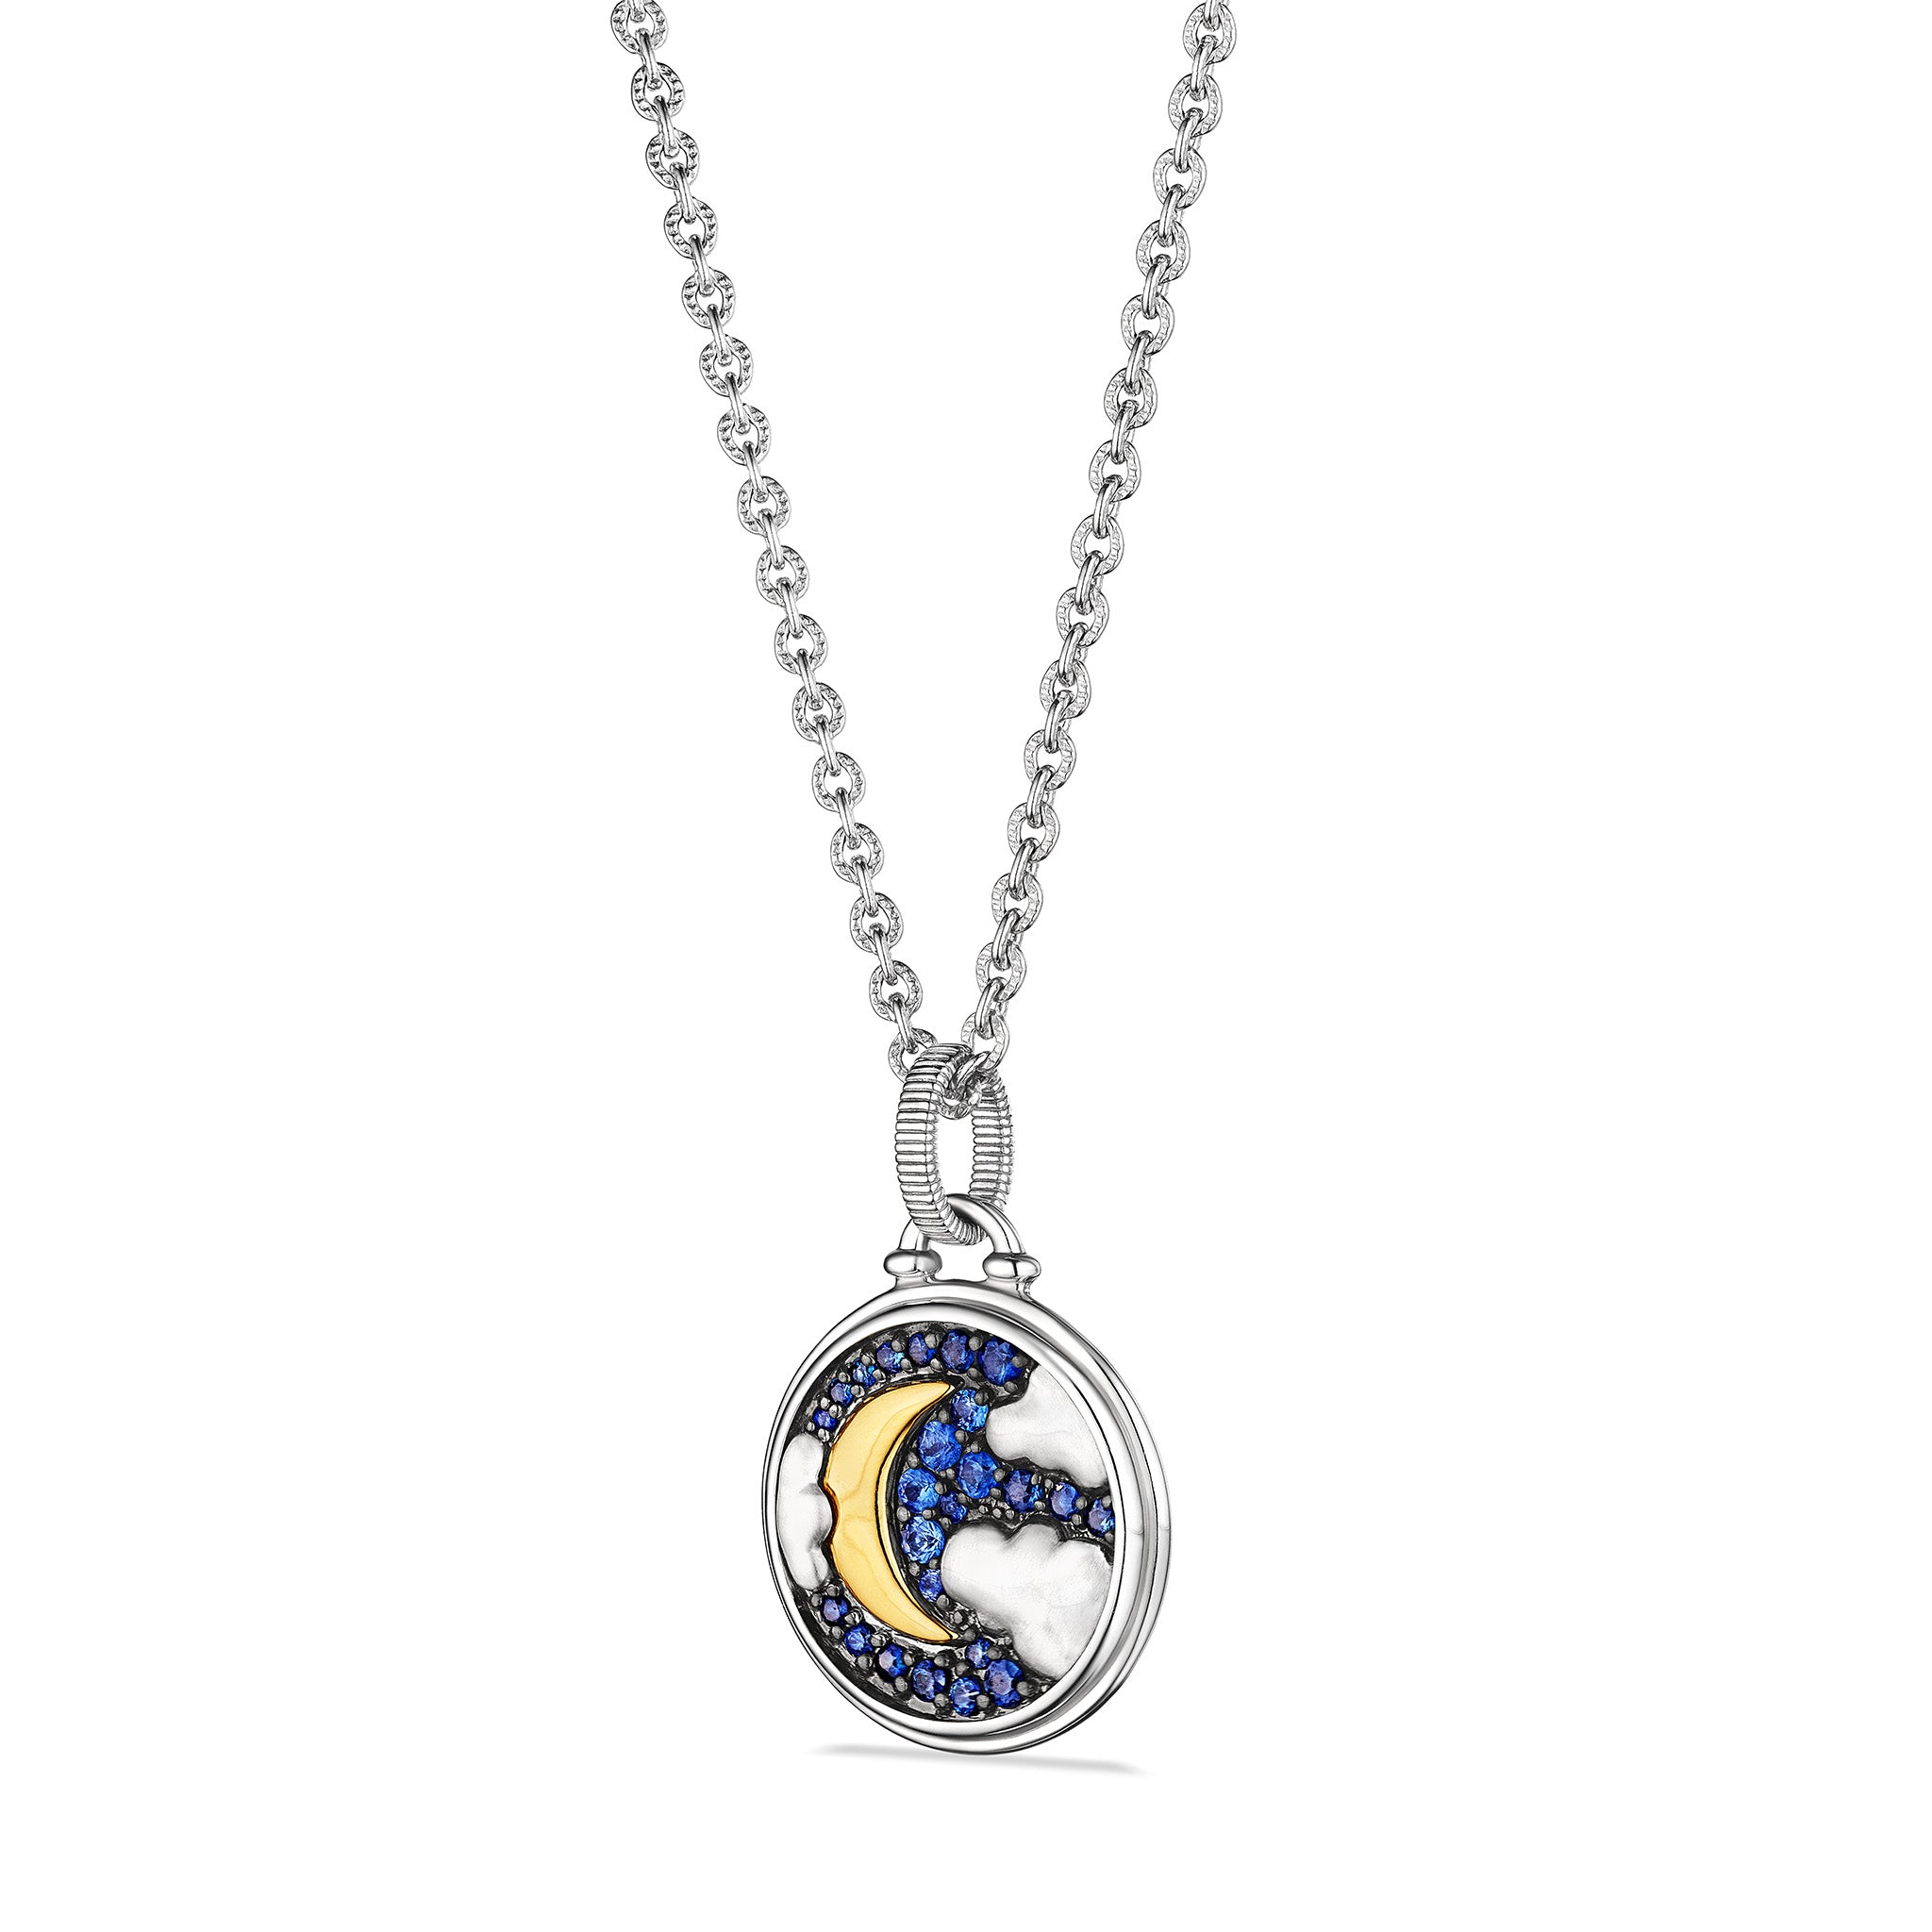 Little Luxuries Night Sky Medallion Necklace with Blue Sapphire, Diamonds and 18K Gold